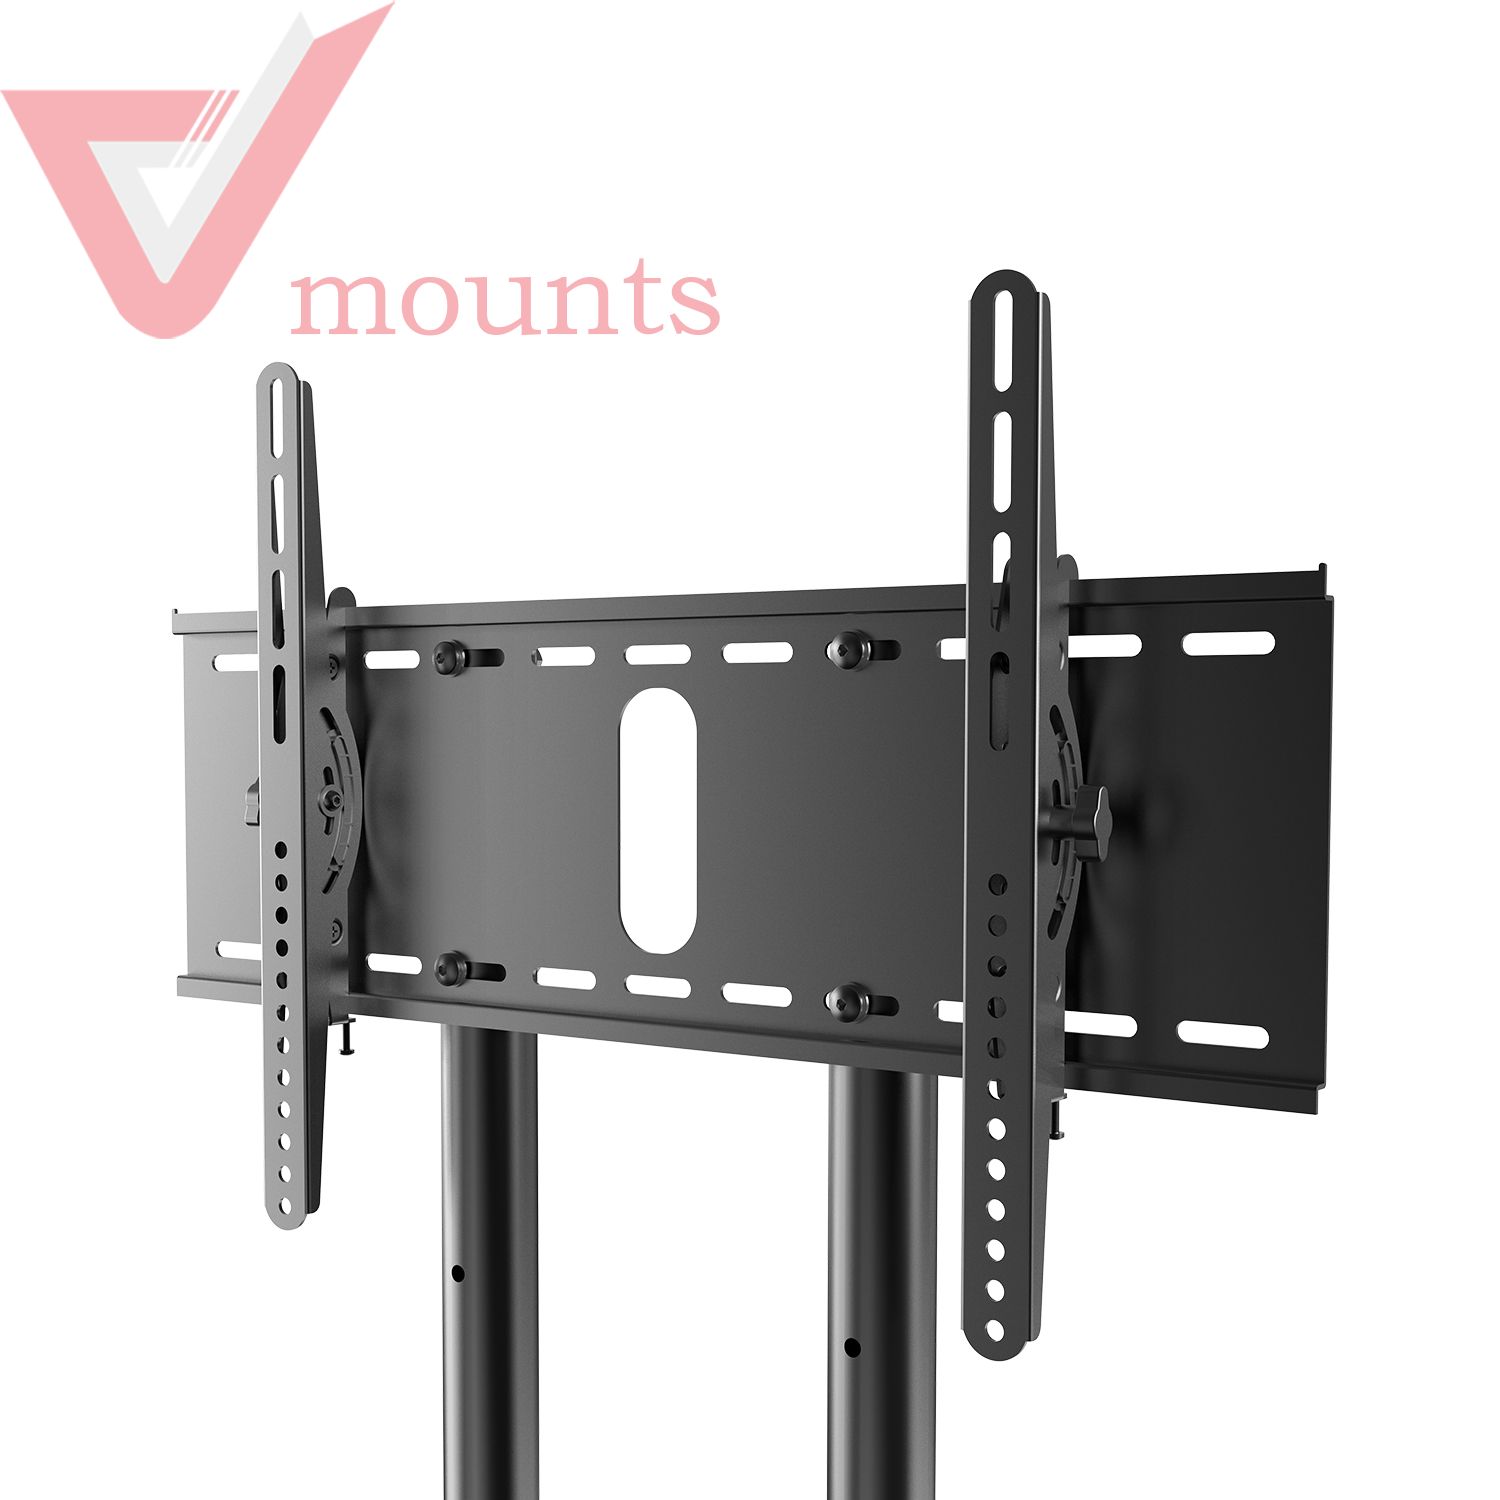 Movable floor LCD monitor TV stand with universal wheels VM-ST01